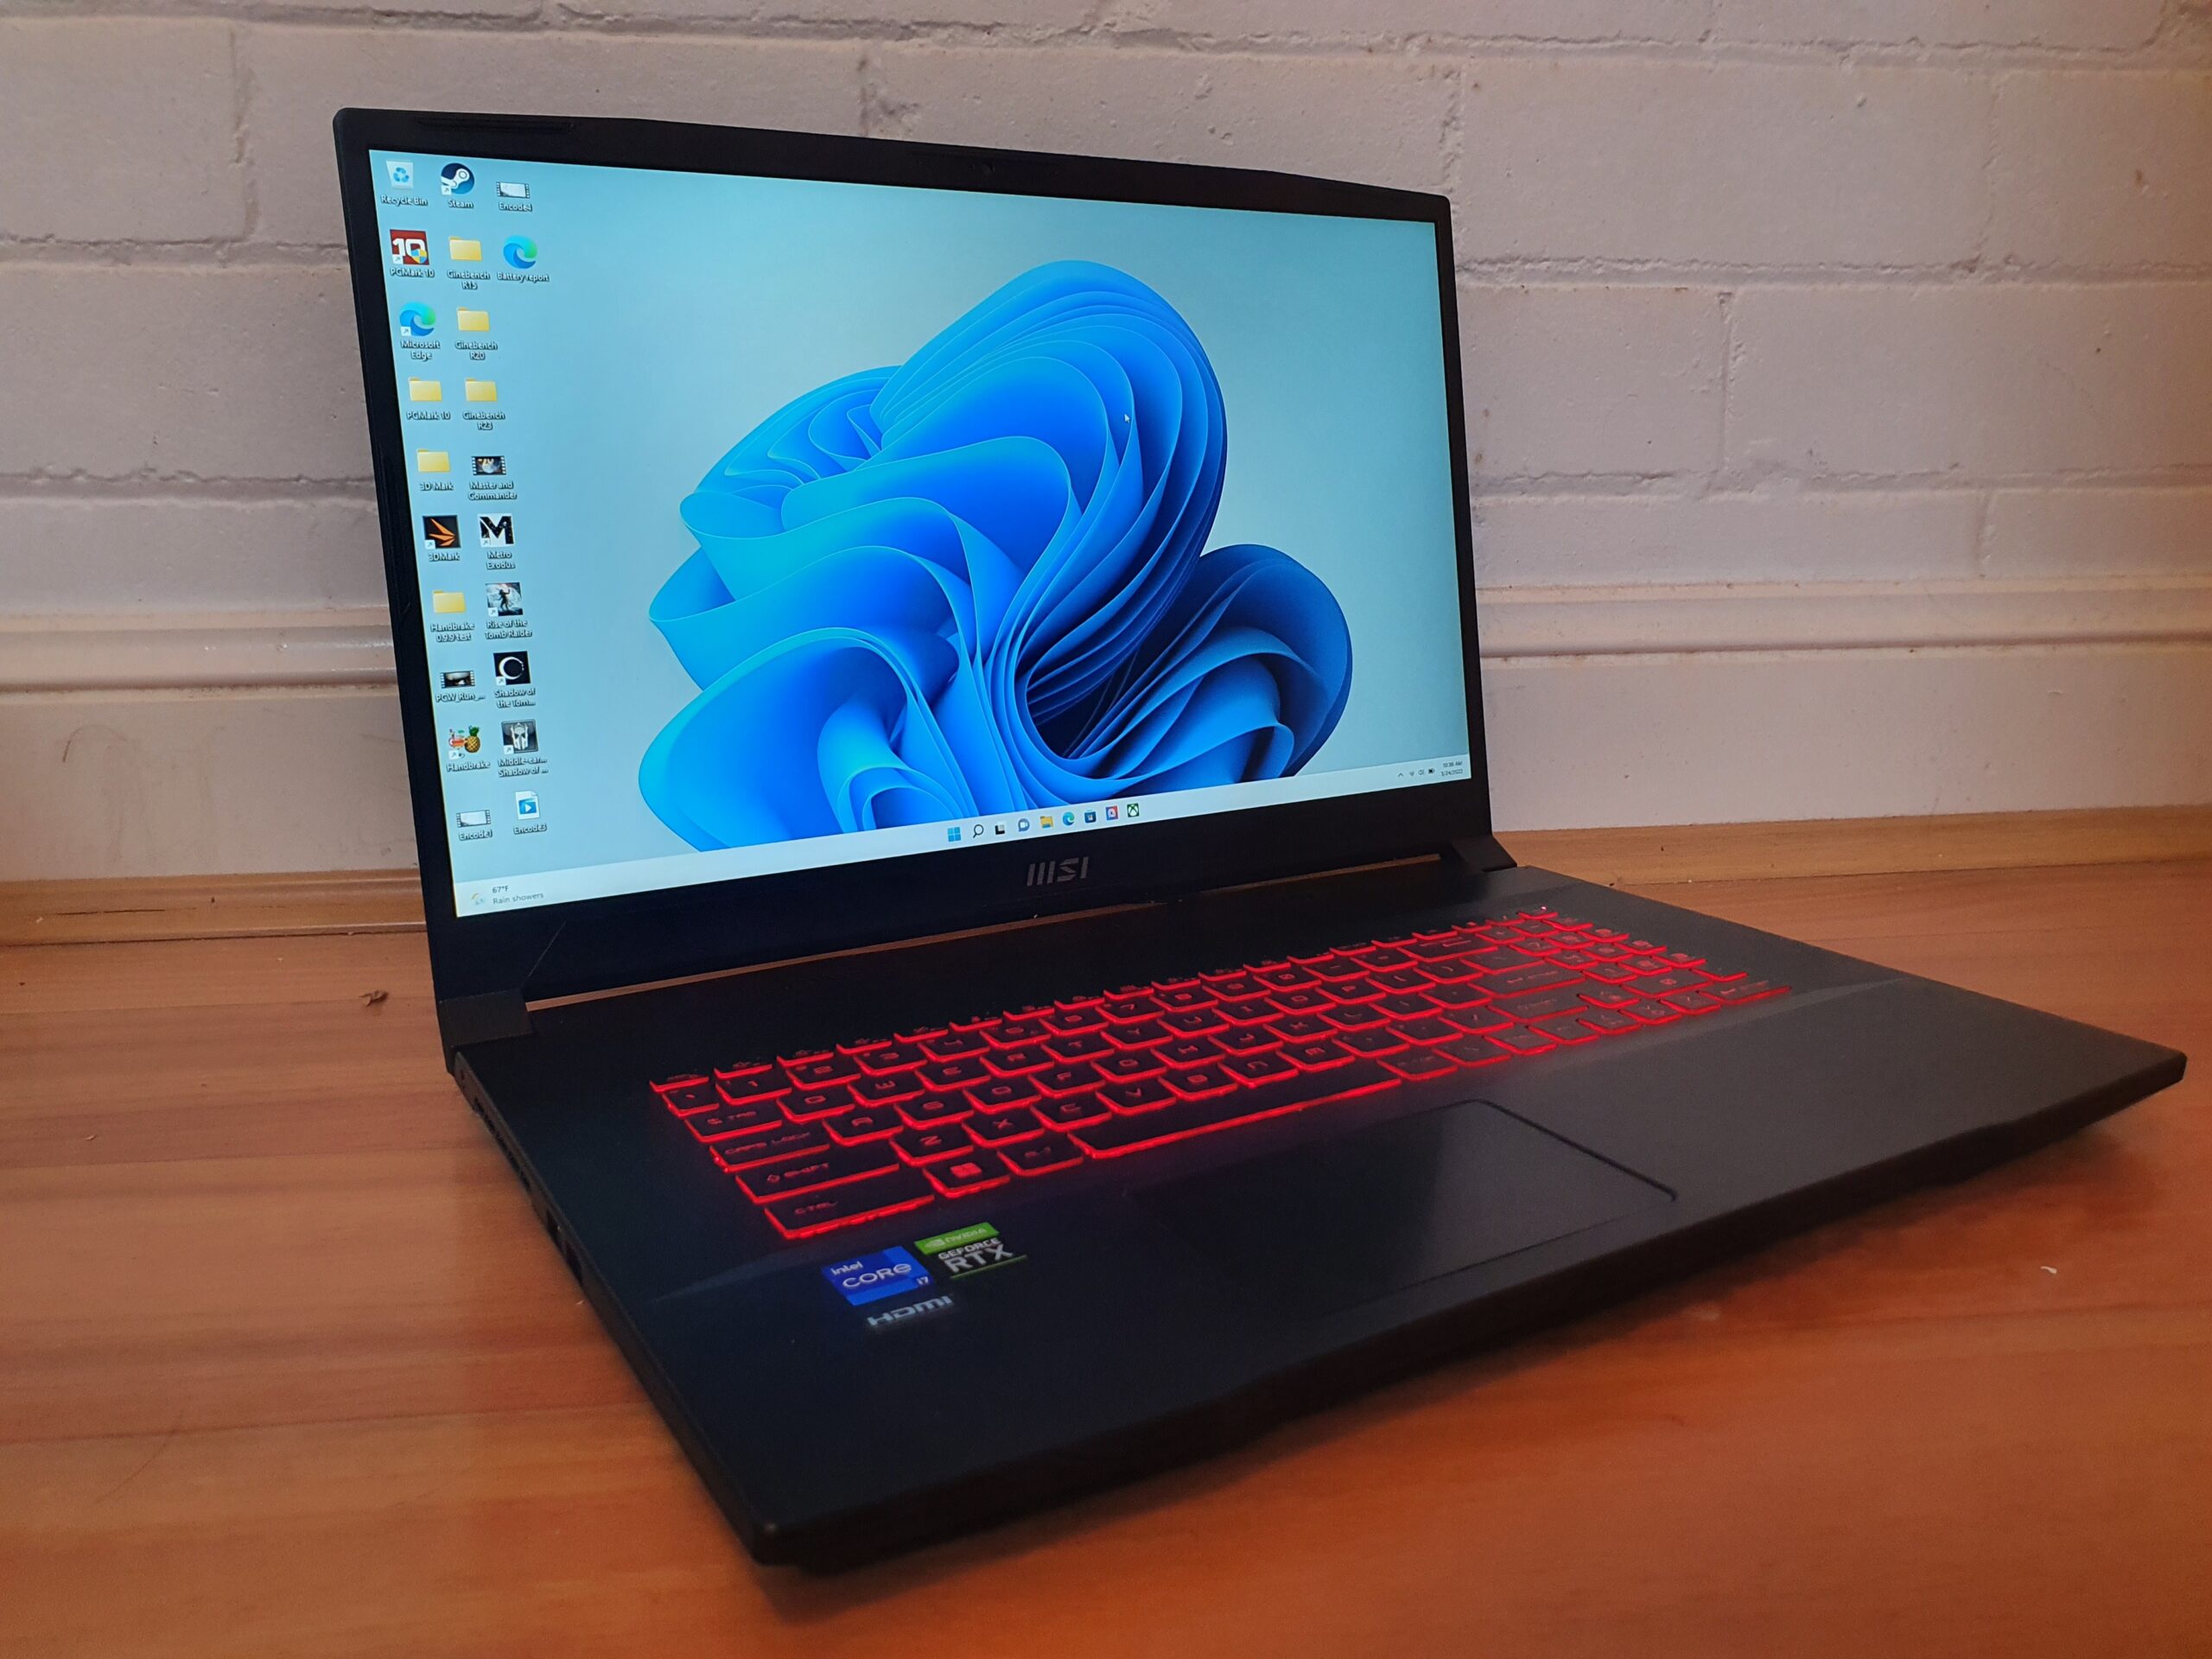 Best gaming laptops under $1,000: Best overall, best battery life, and more